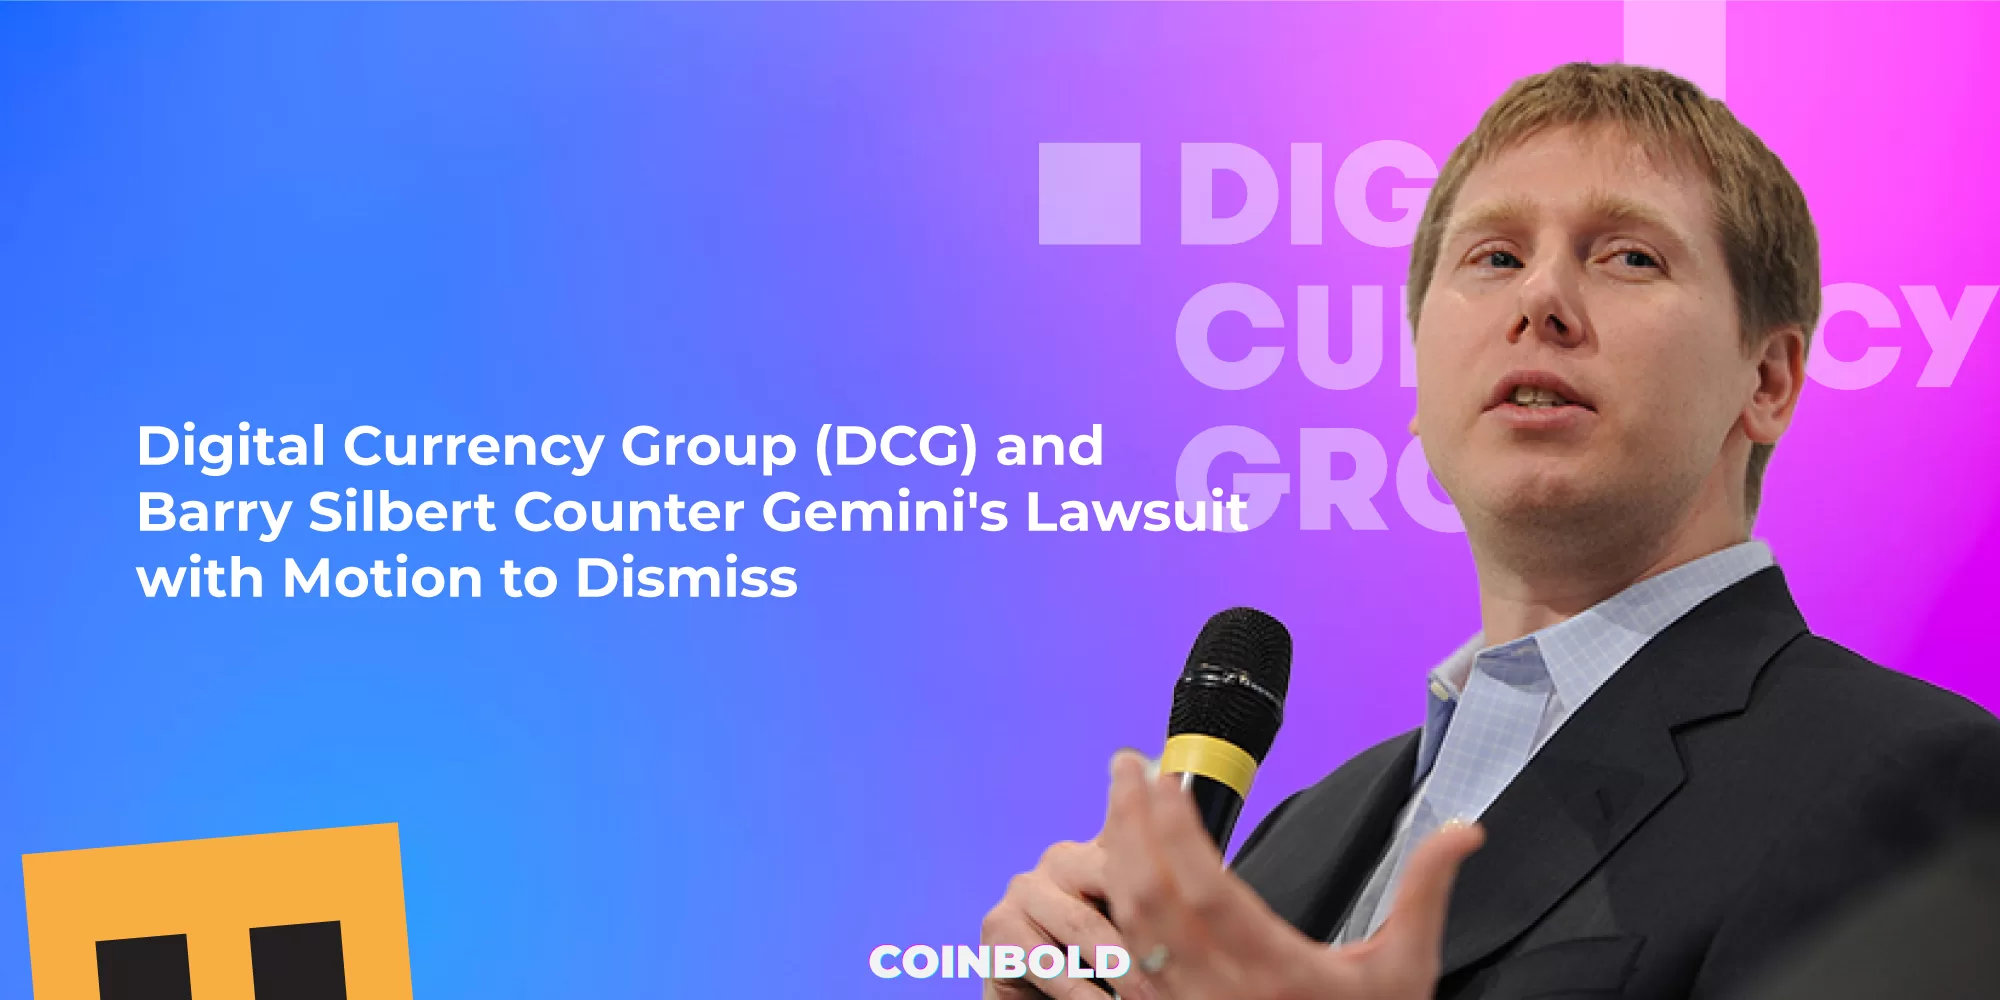 Digital Currency Group (DCG) and Barry Silbert Counter Gemini's Lawsuit with Motion to Dismiss